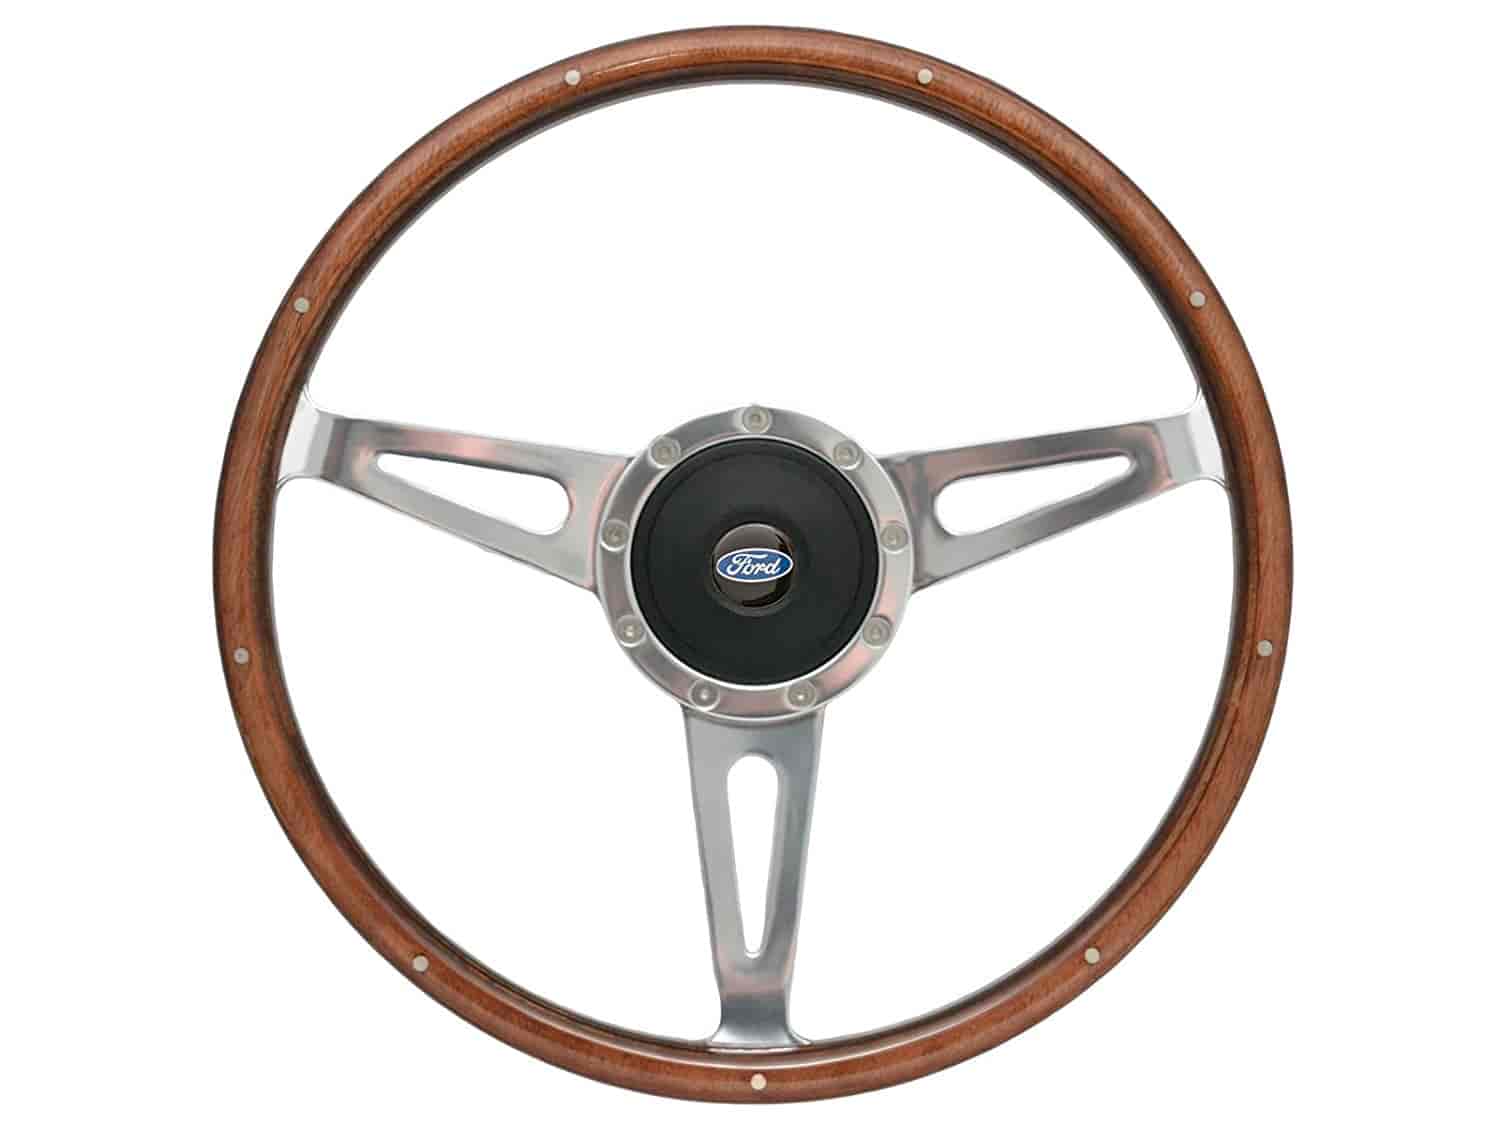 S9 Classic Steering Wheel Kit for 1964-1972 Ford/Mercury, 15 in. Diameter, Walnut Wood Grip, with 9-Bolt Adapter & Horn Button